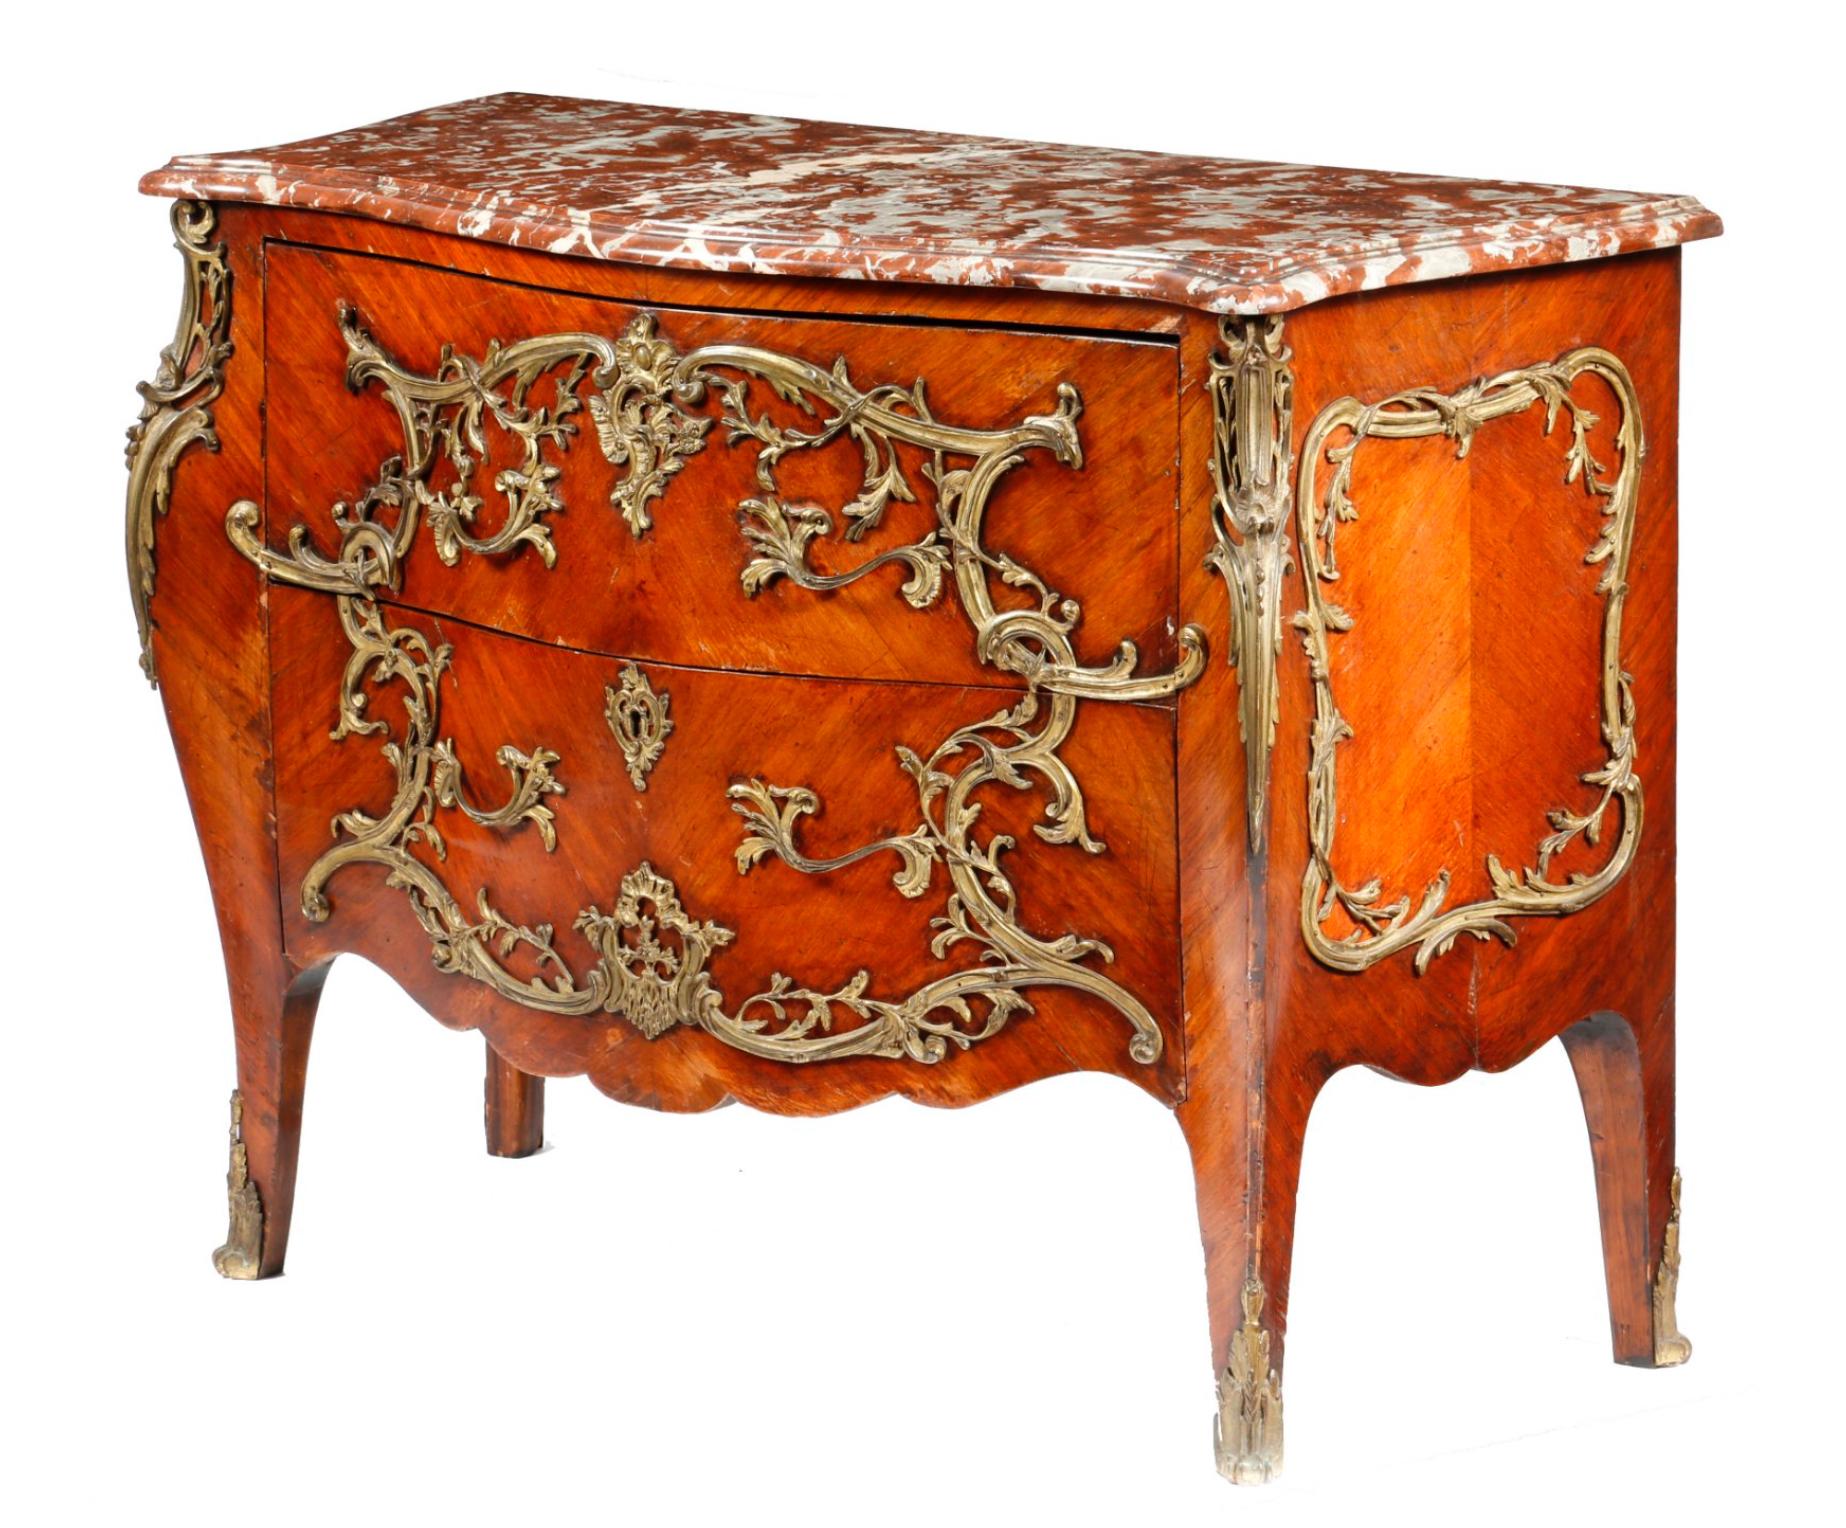 19th century French kingwood bombe commode with red marble top in Louis XV style, with scrolling leaf ormolu mounts, the serpentine marble top with a moulded edge, above two deep drawers and keeled angles.
France, circa 1860.
     